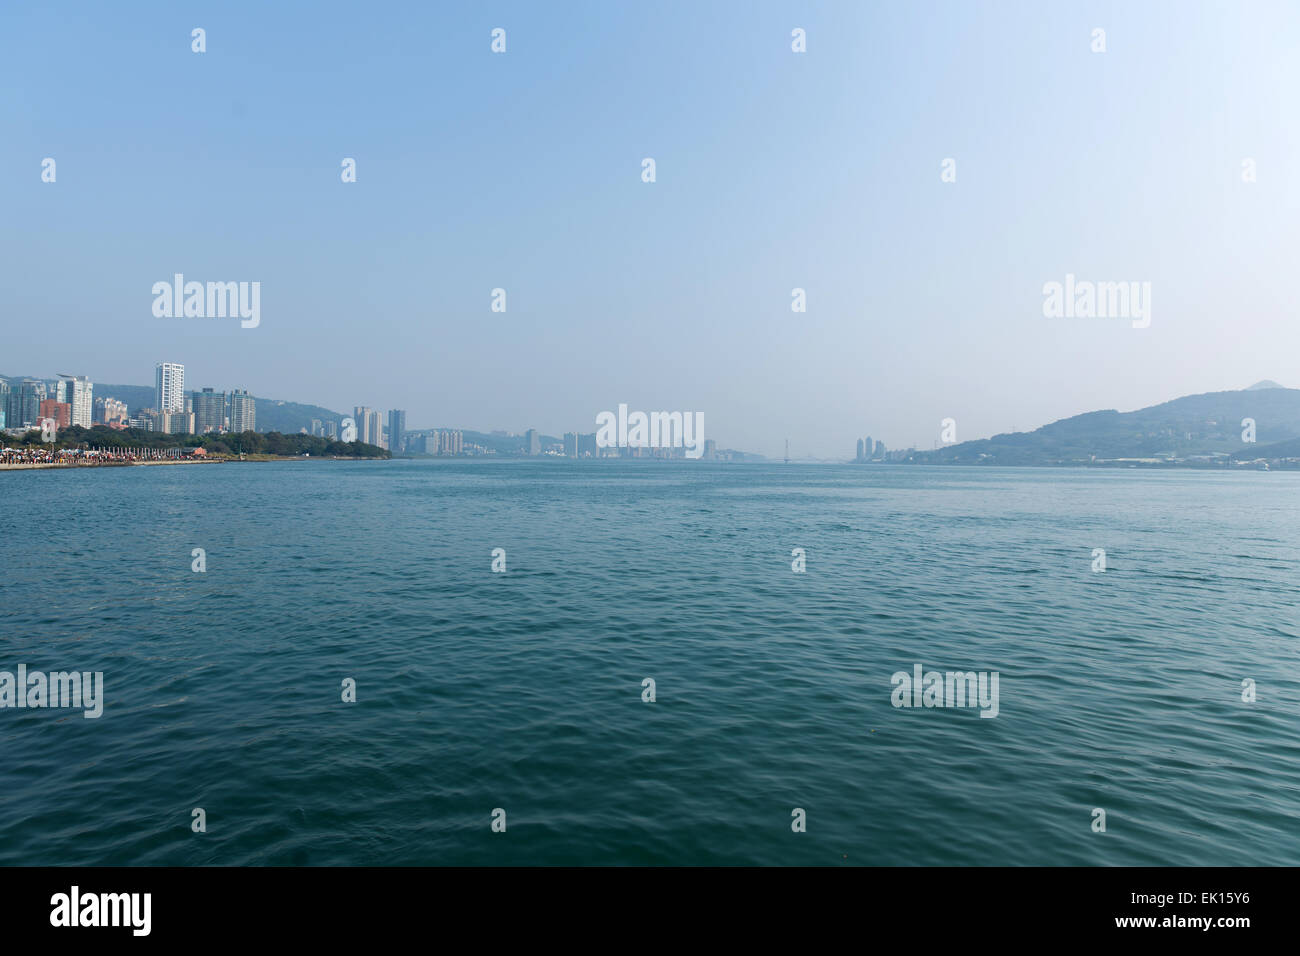 Scenery of Tamsui river in Tamsui, New Taipei City, Taiwan. Stock Photo